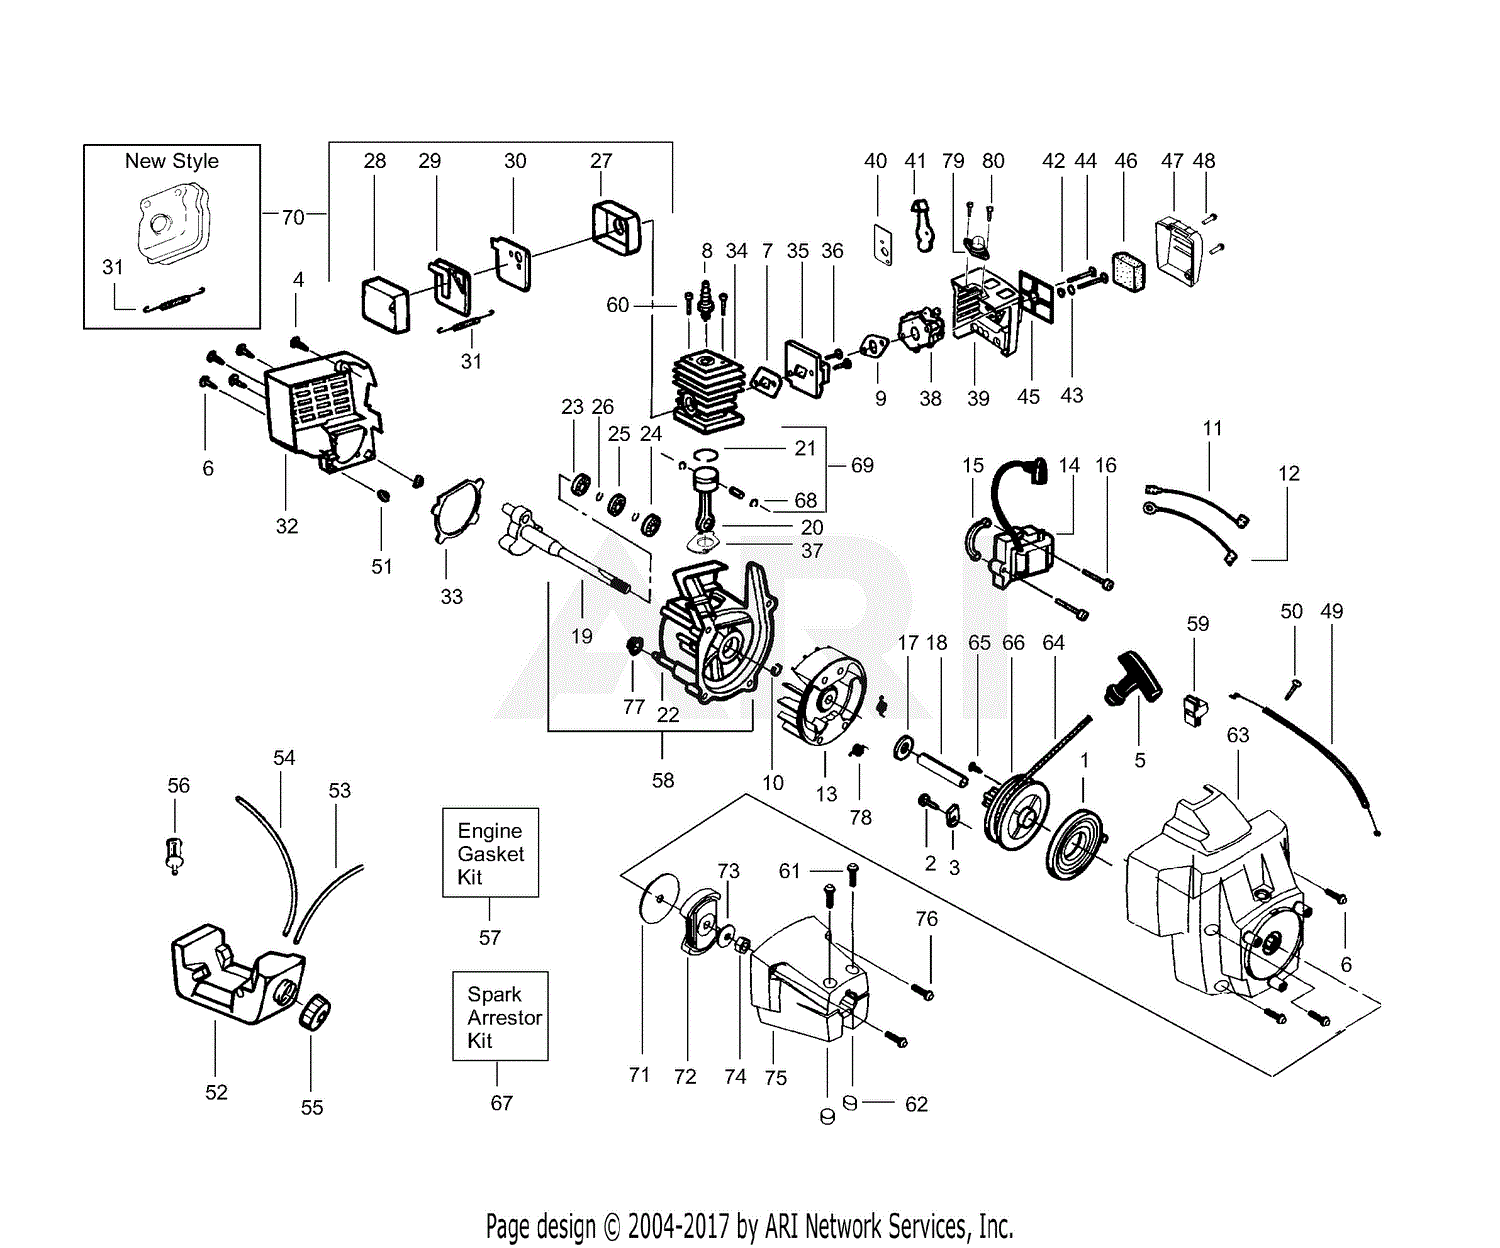 Stihl Weed Eater Parts Diagram 6240 Hot Sex Picture